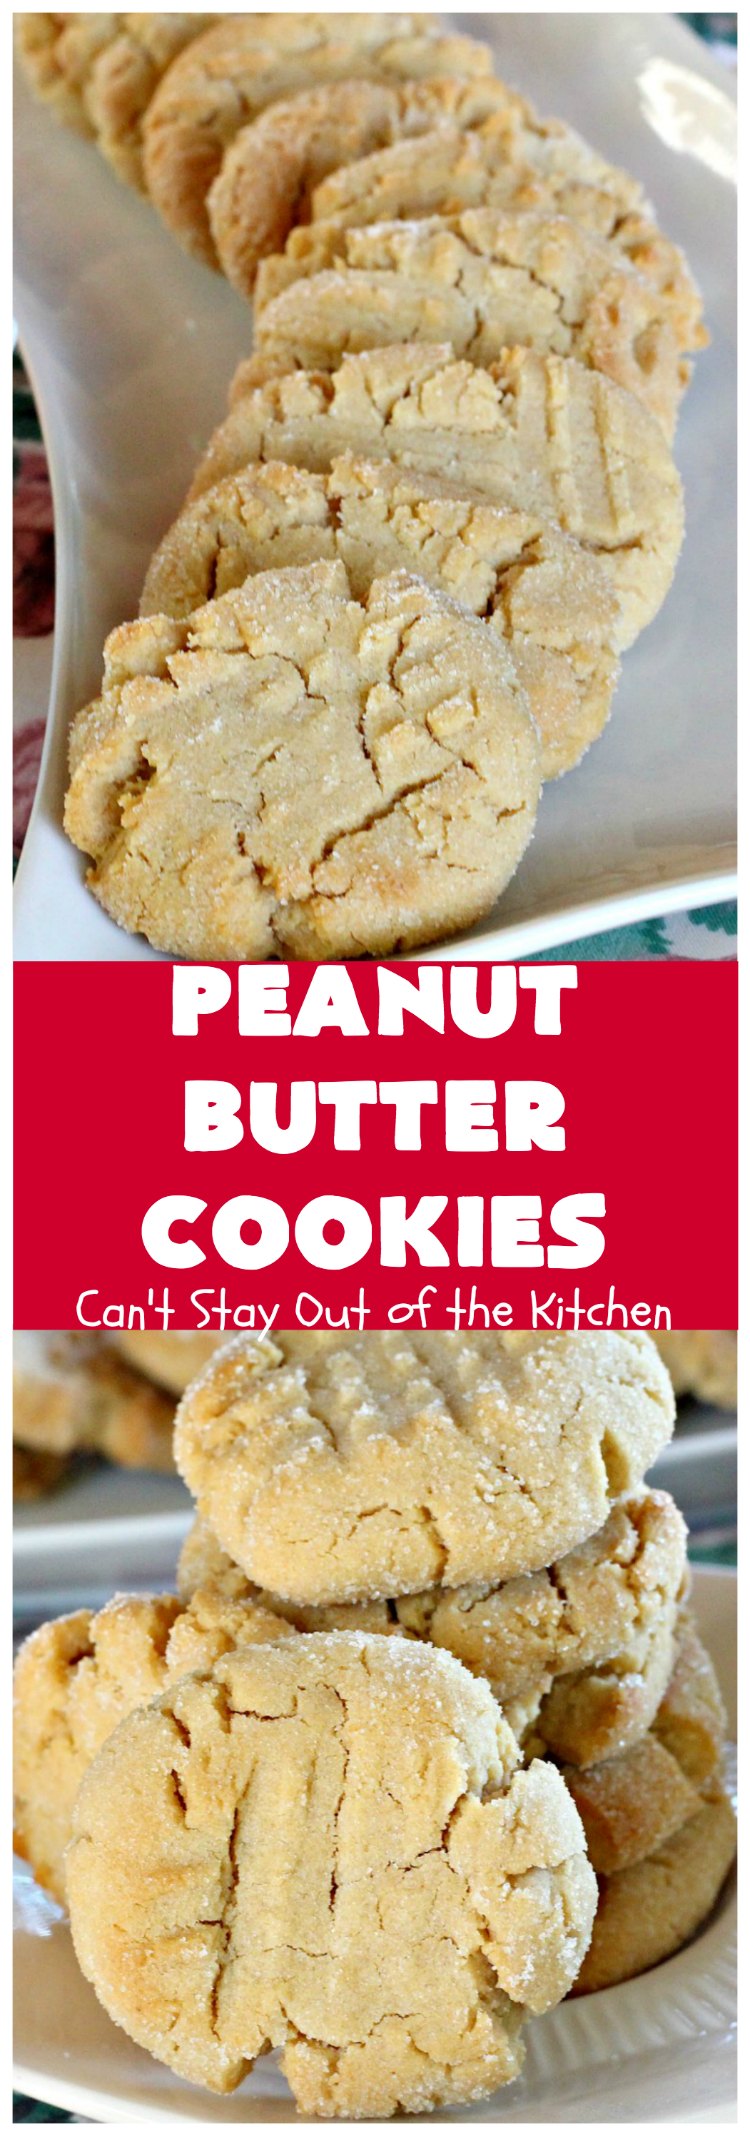 Peanut Butter Cookies | Can't Stay Out of the Kitchen